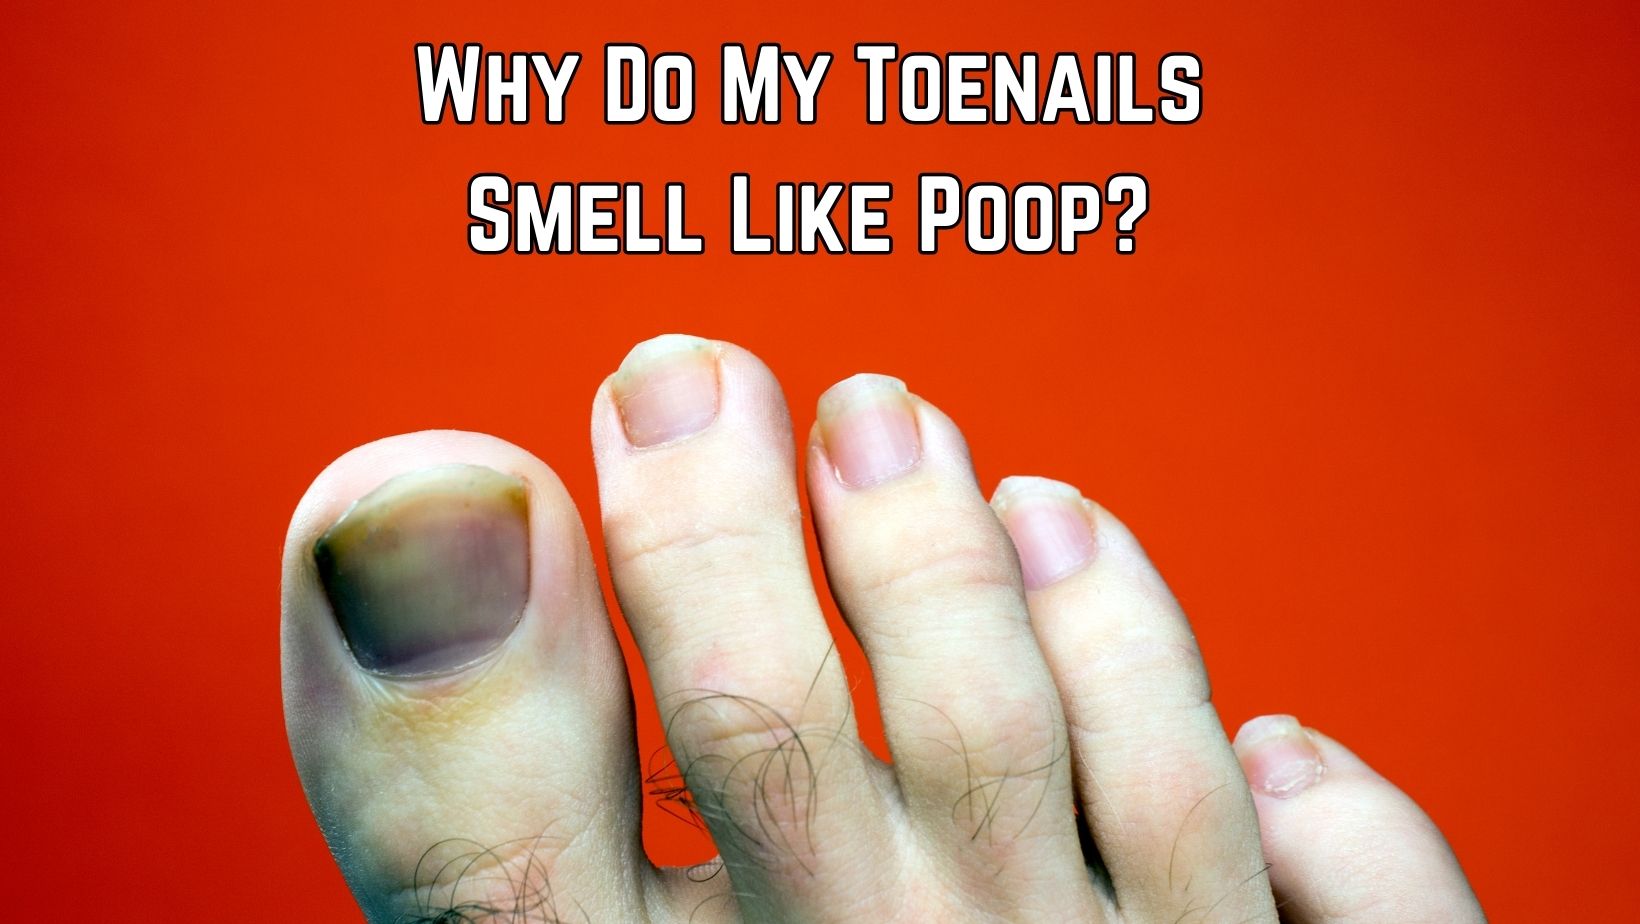 Why Do My Toenails Smell Like Poop